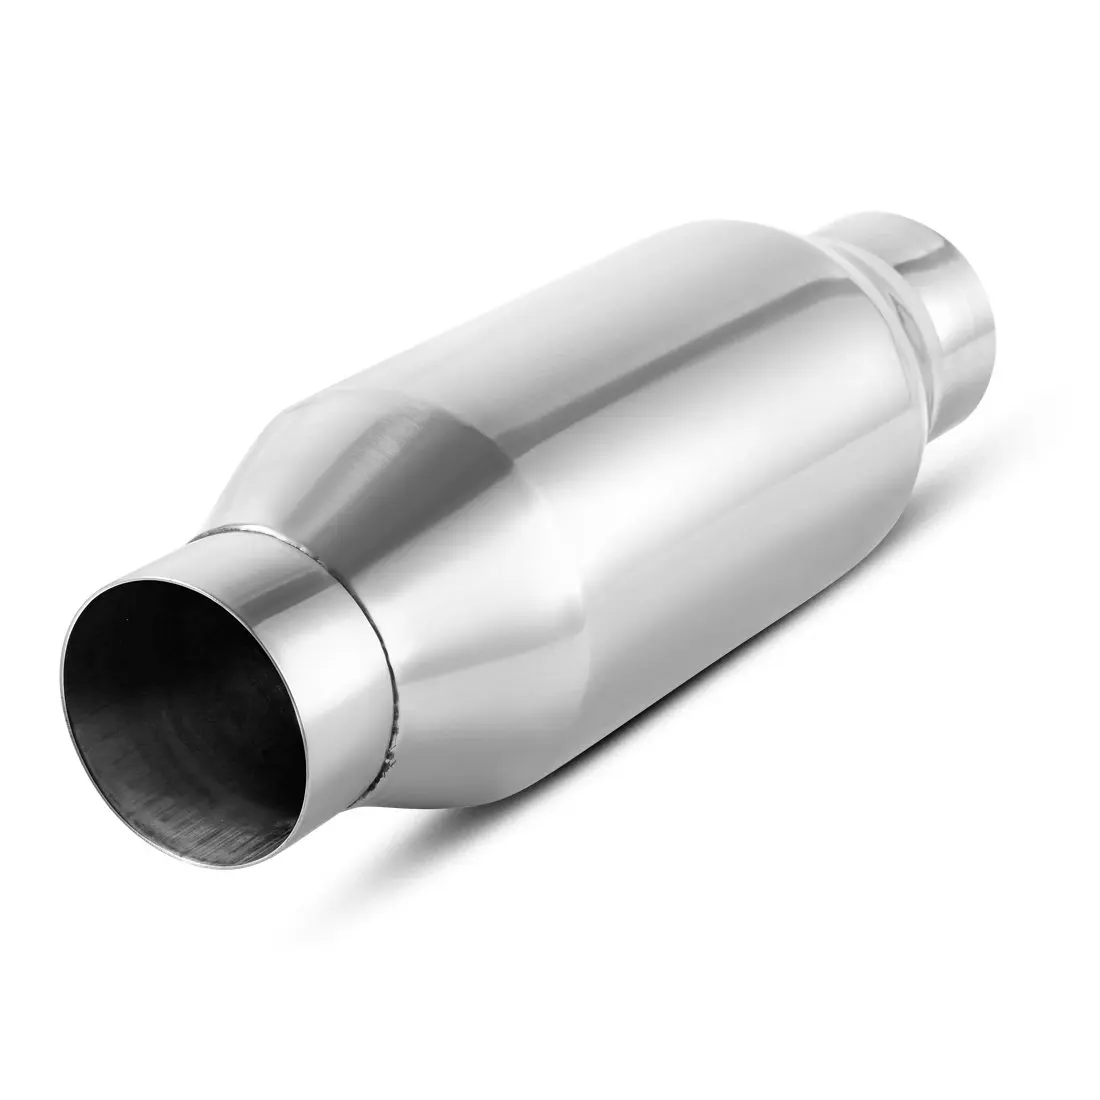 Cheap 2 Inch Inlet Exhaust Tips, find 2 Inch Inlet Exhaust Tips deals